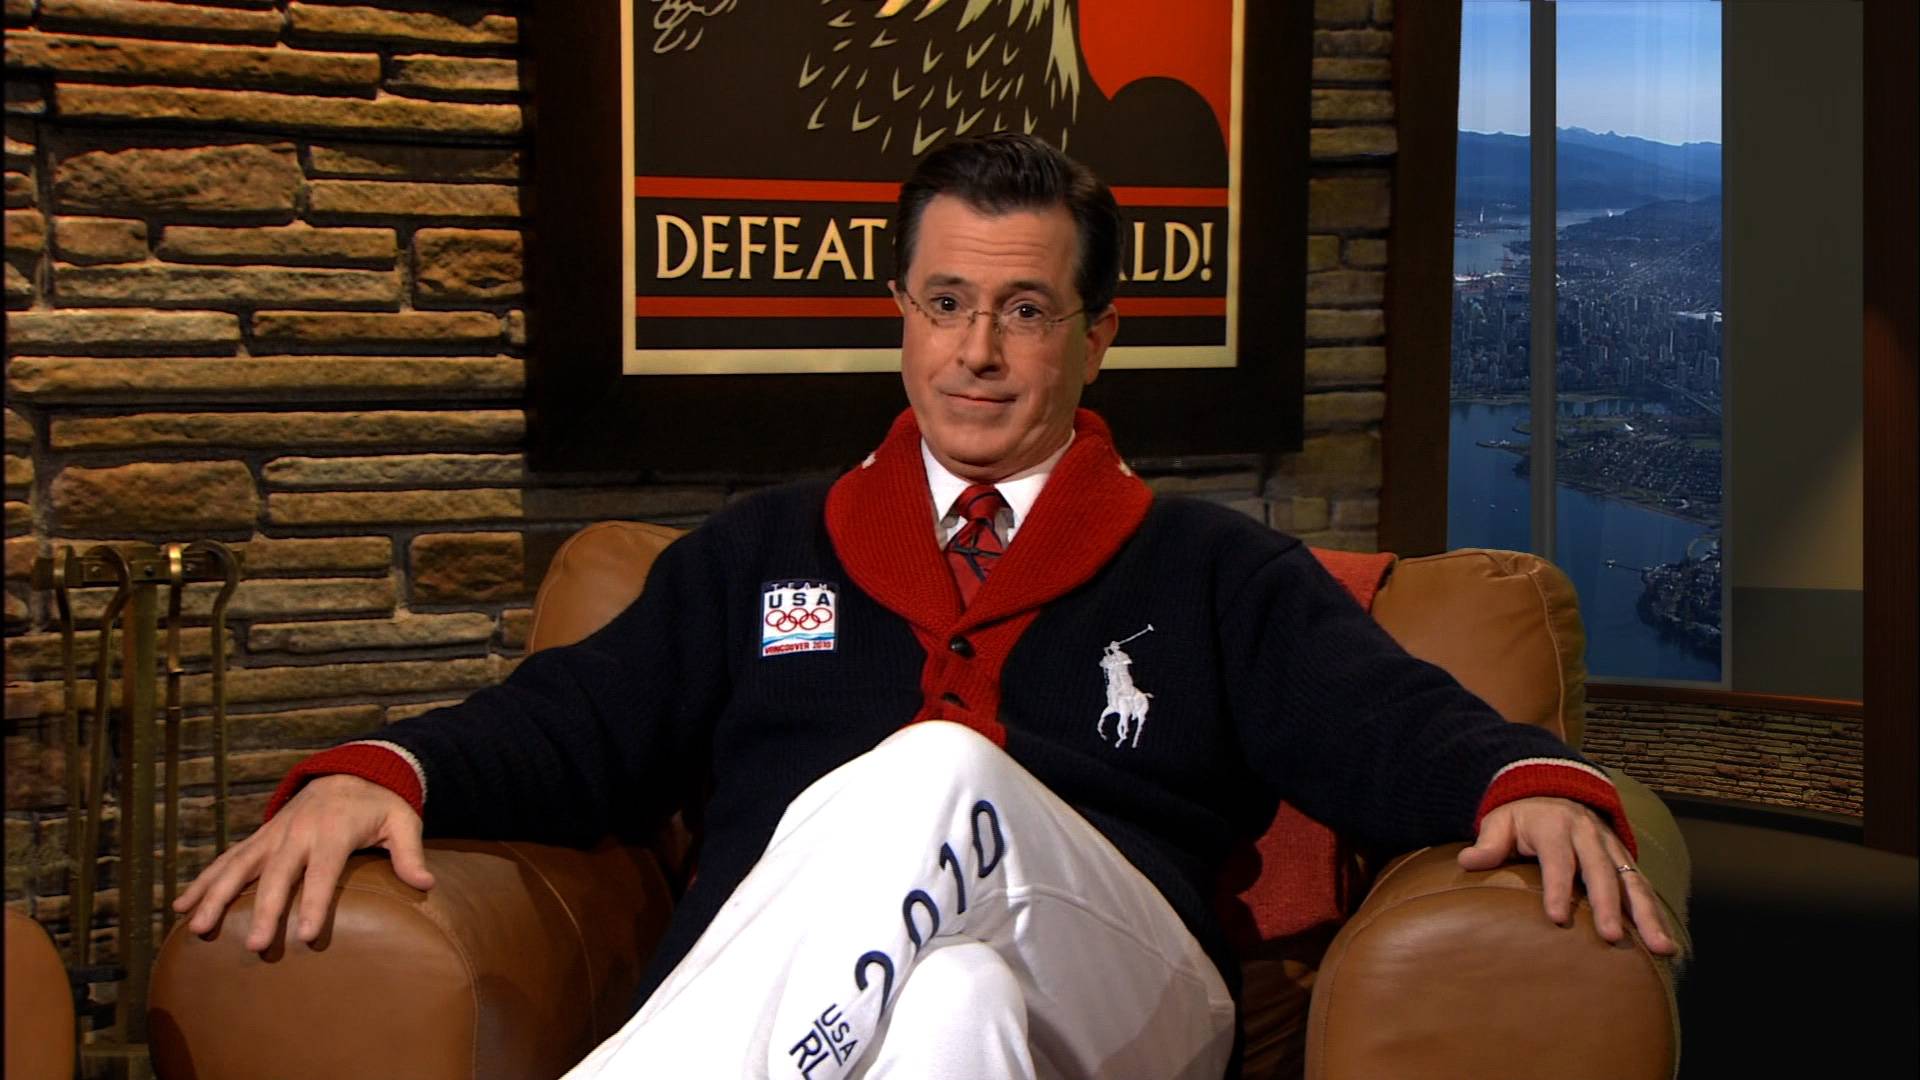 Better Know a Riding - Vancouver's South - The Colbert Report (Video Clip)